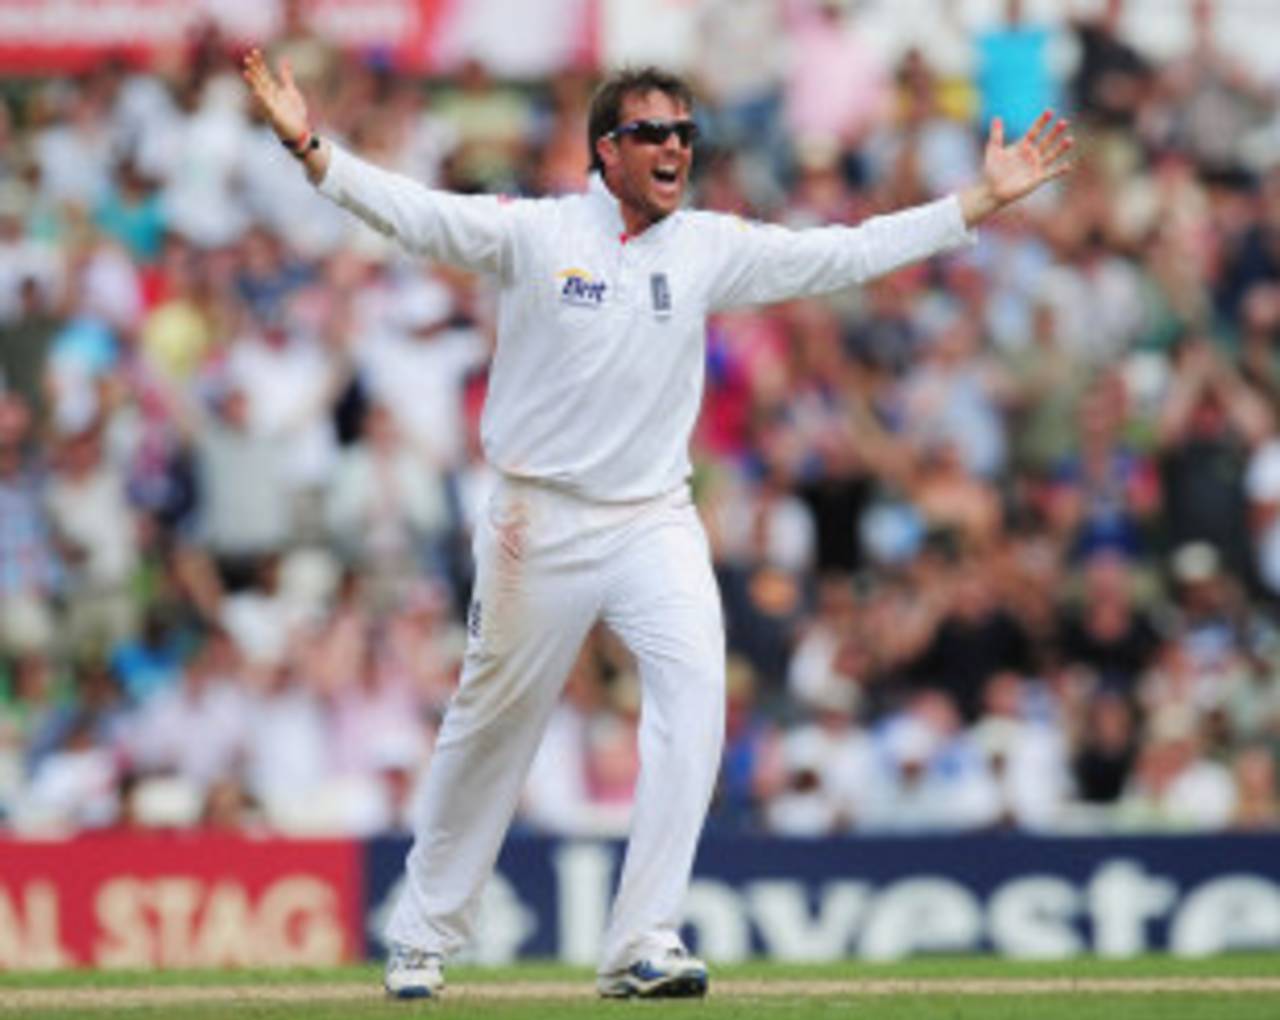 Graeme Swann has lifted England's spin attack from mediocre to outstanding&nbsp;&nbsp;&bull;&nbsp;&nbsp;Getty Images